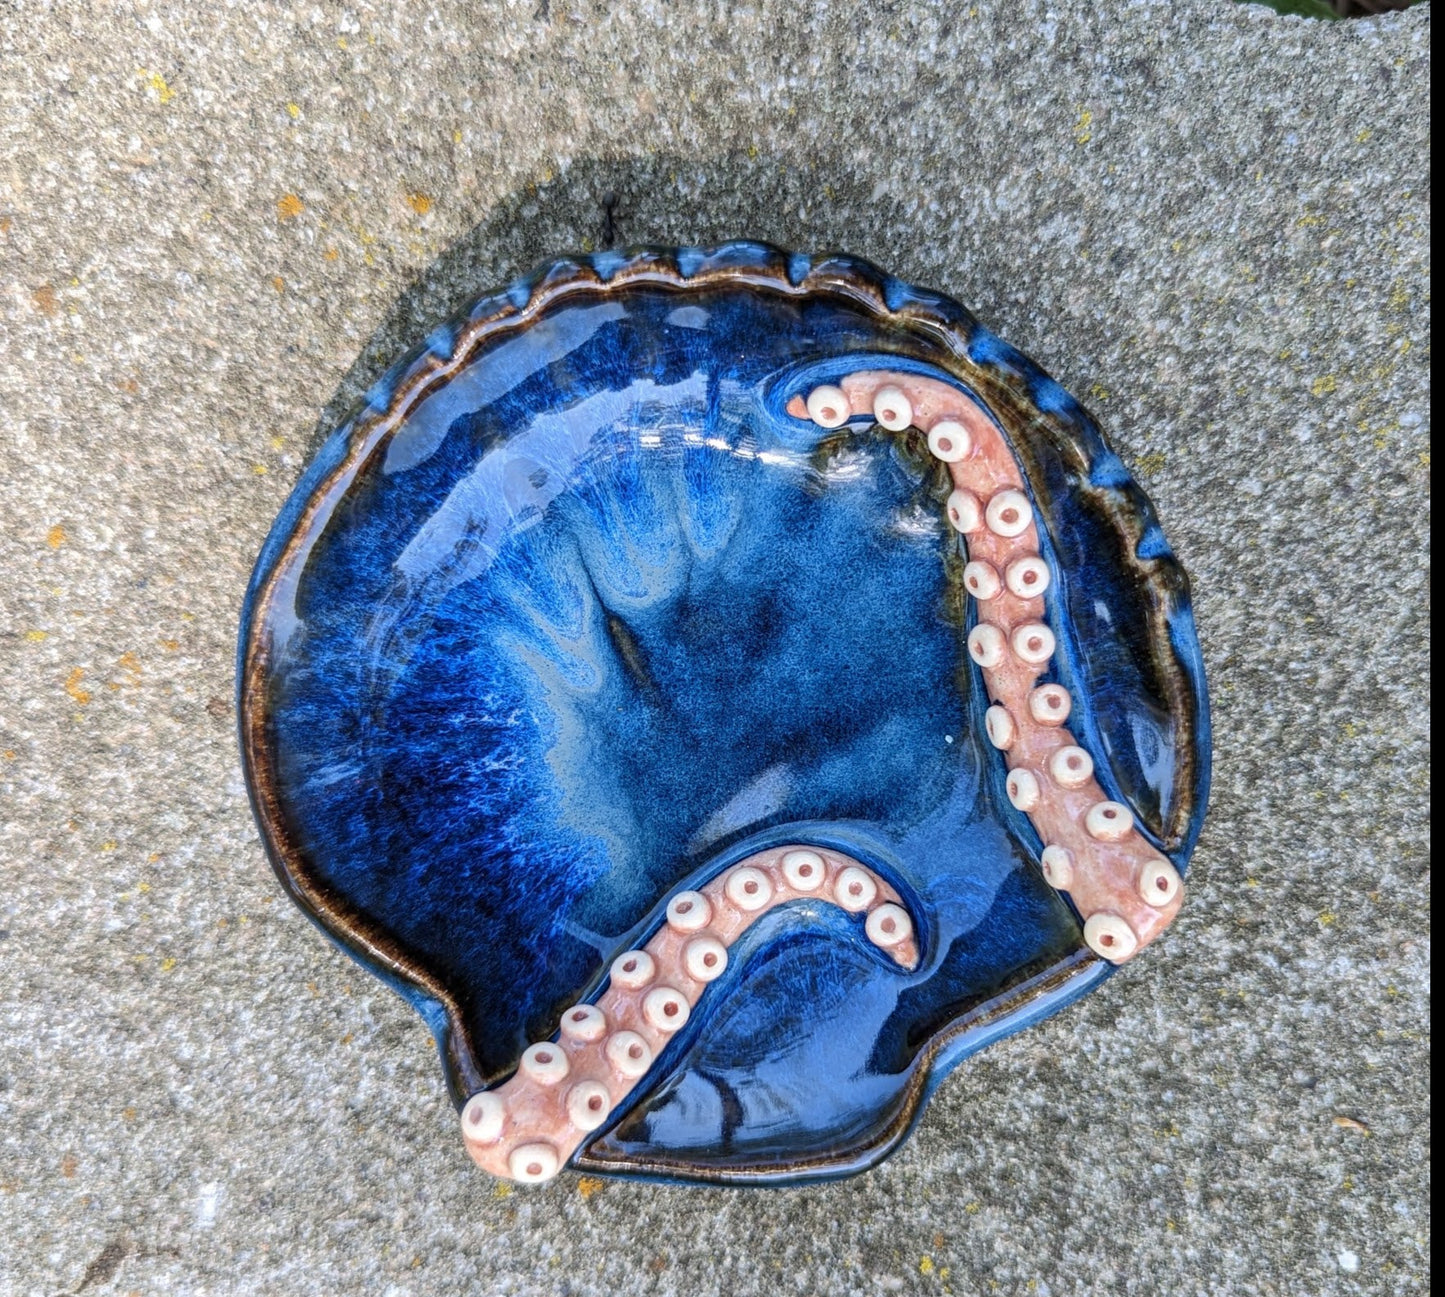 Make Your Own Scallop Shell Dish with an Octopus Tentacle - Saturday, June 15th